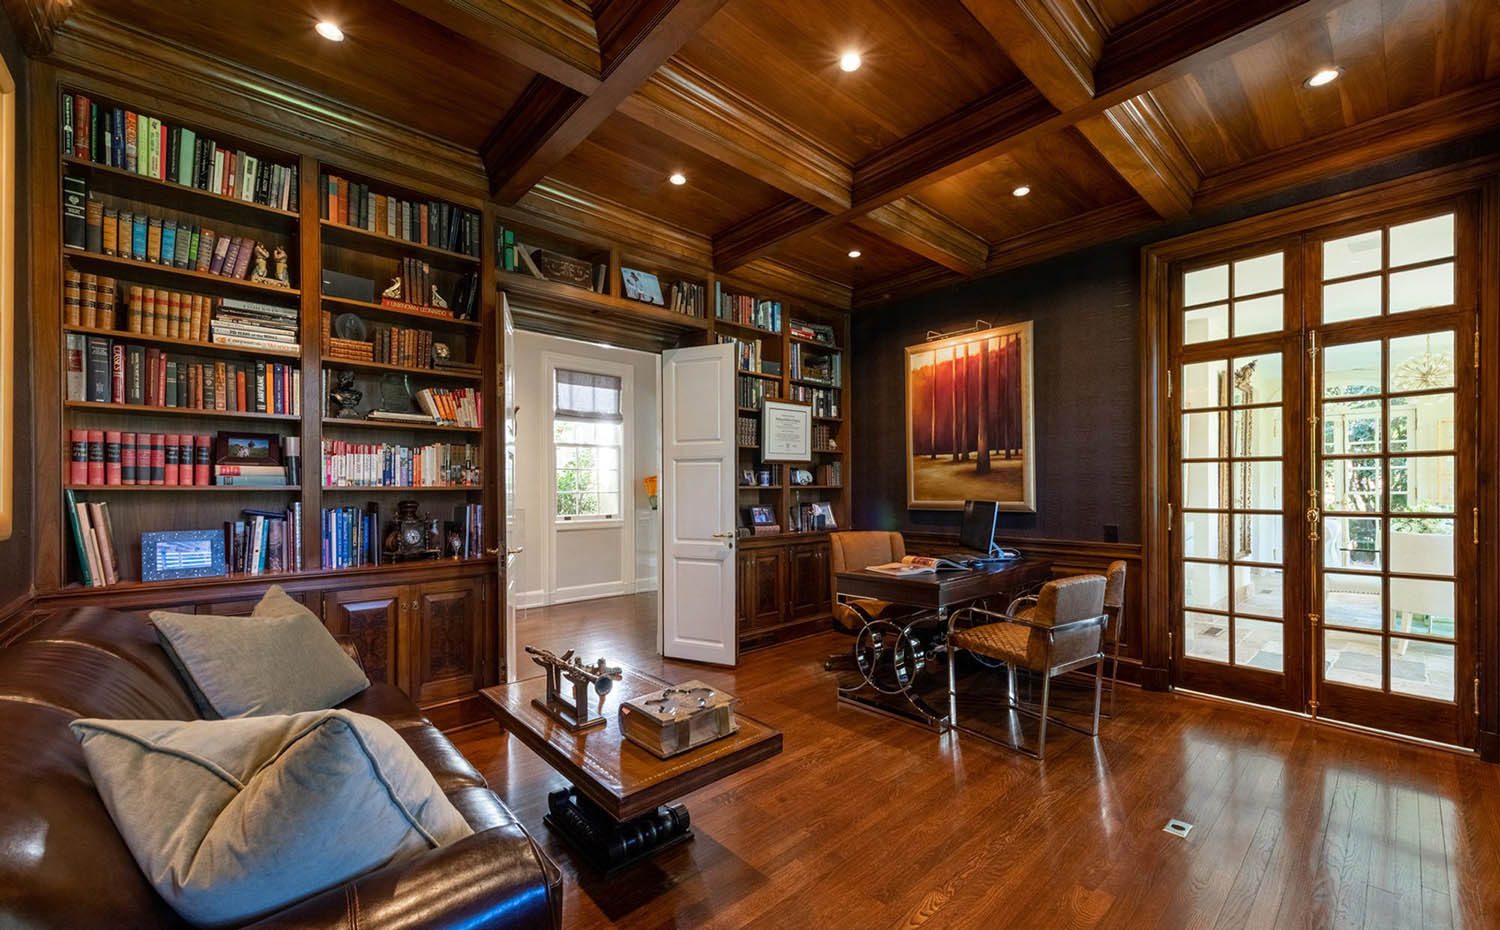 Home office with all wood walls and coffered ceiling with built in shelves and hardwood floors. Matching stain.